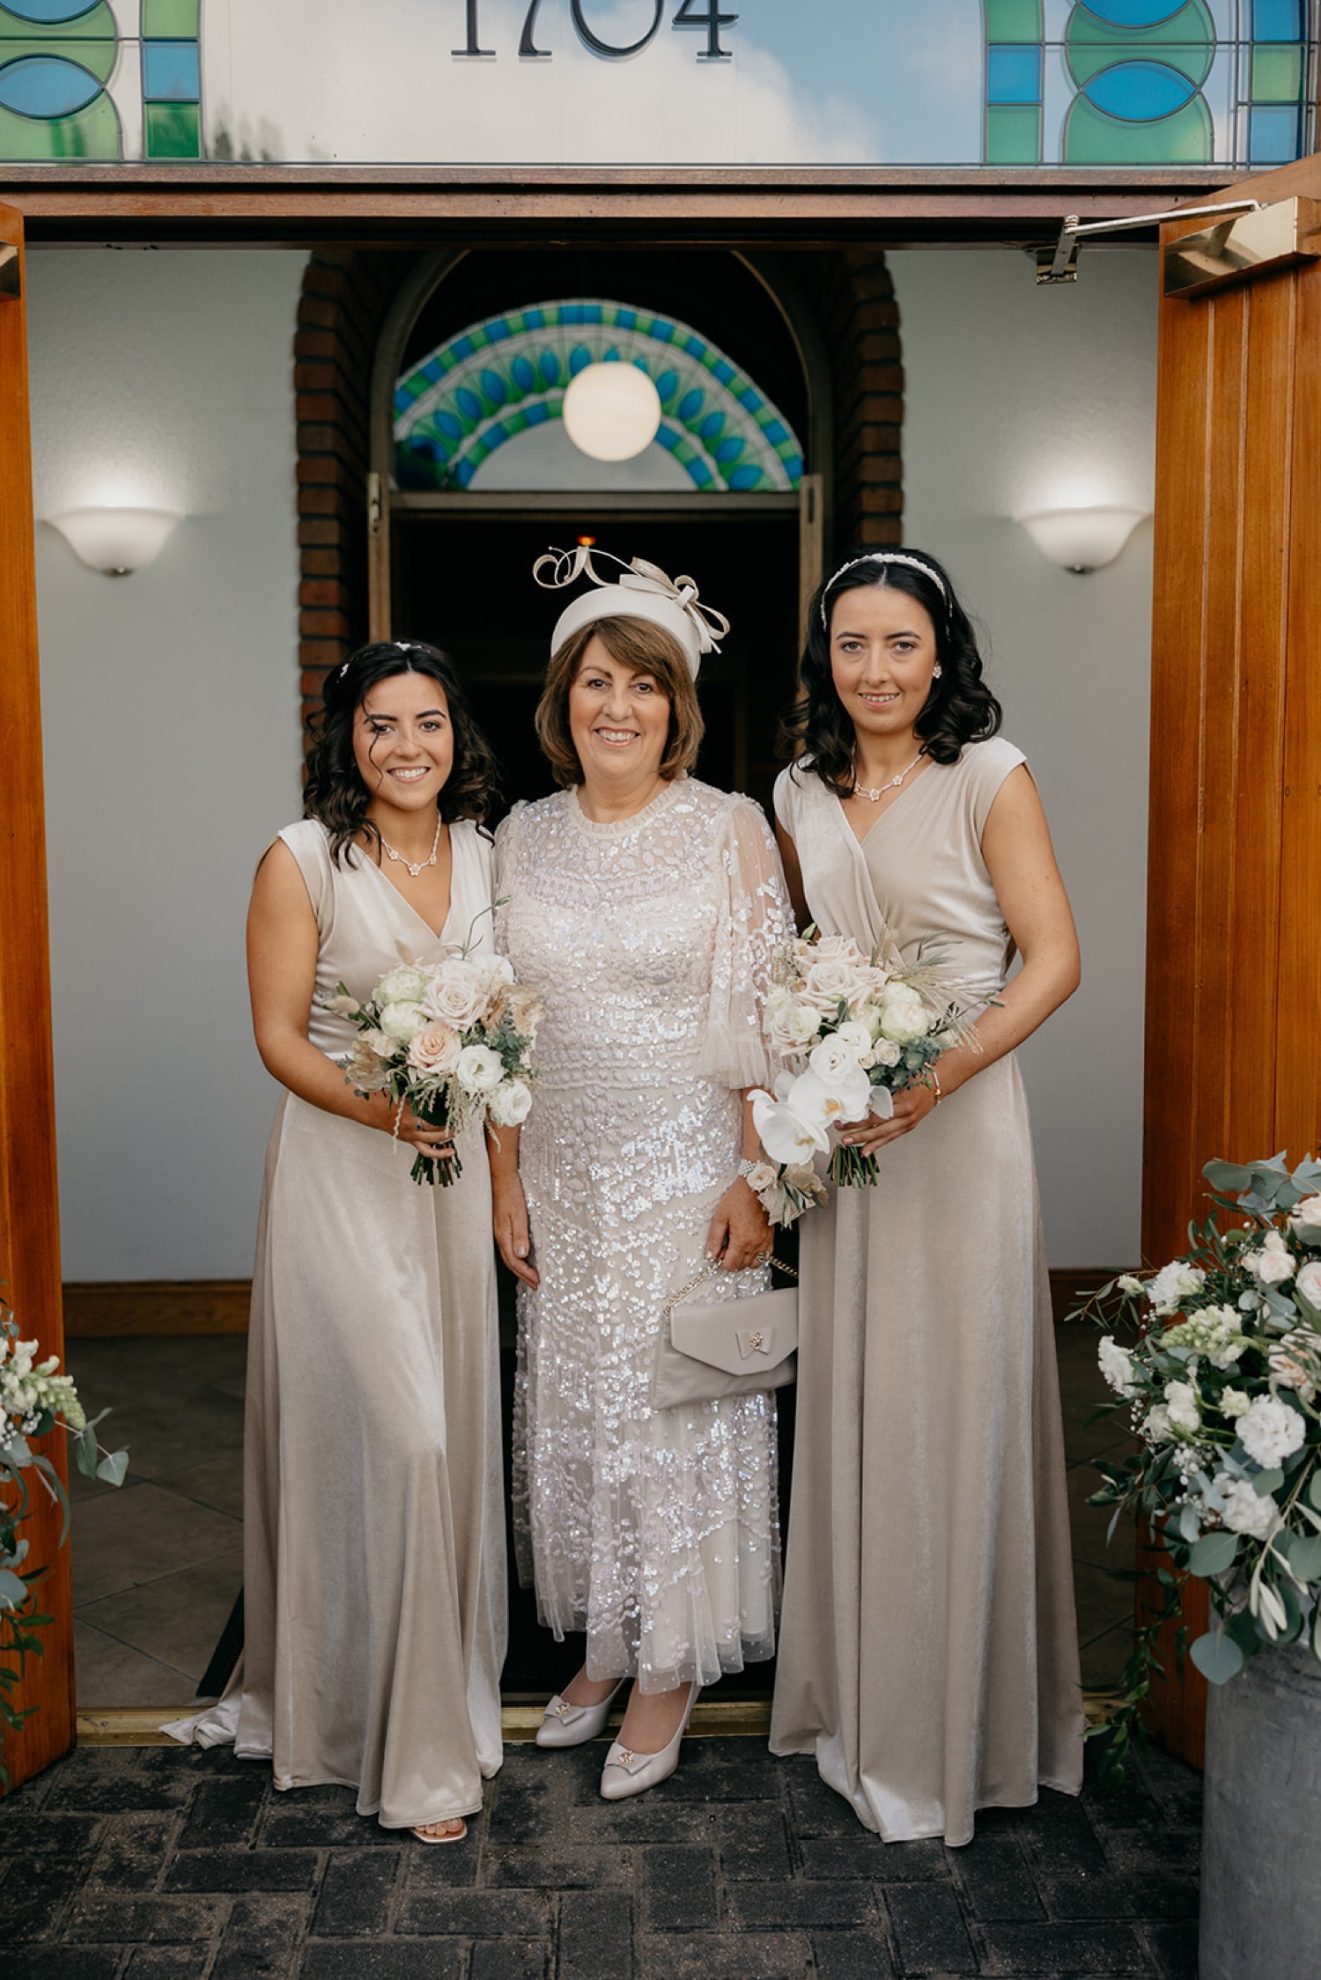 Joanne's mum with her bridesmaids at the church before the ceremony